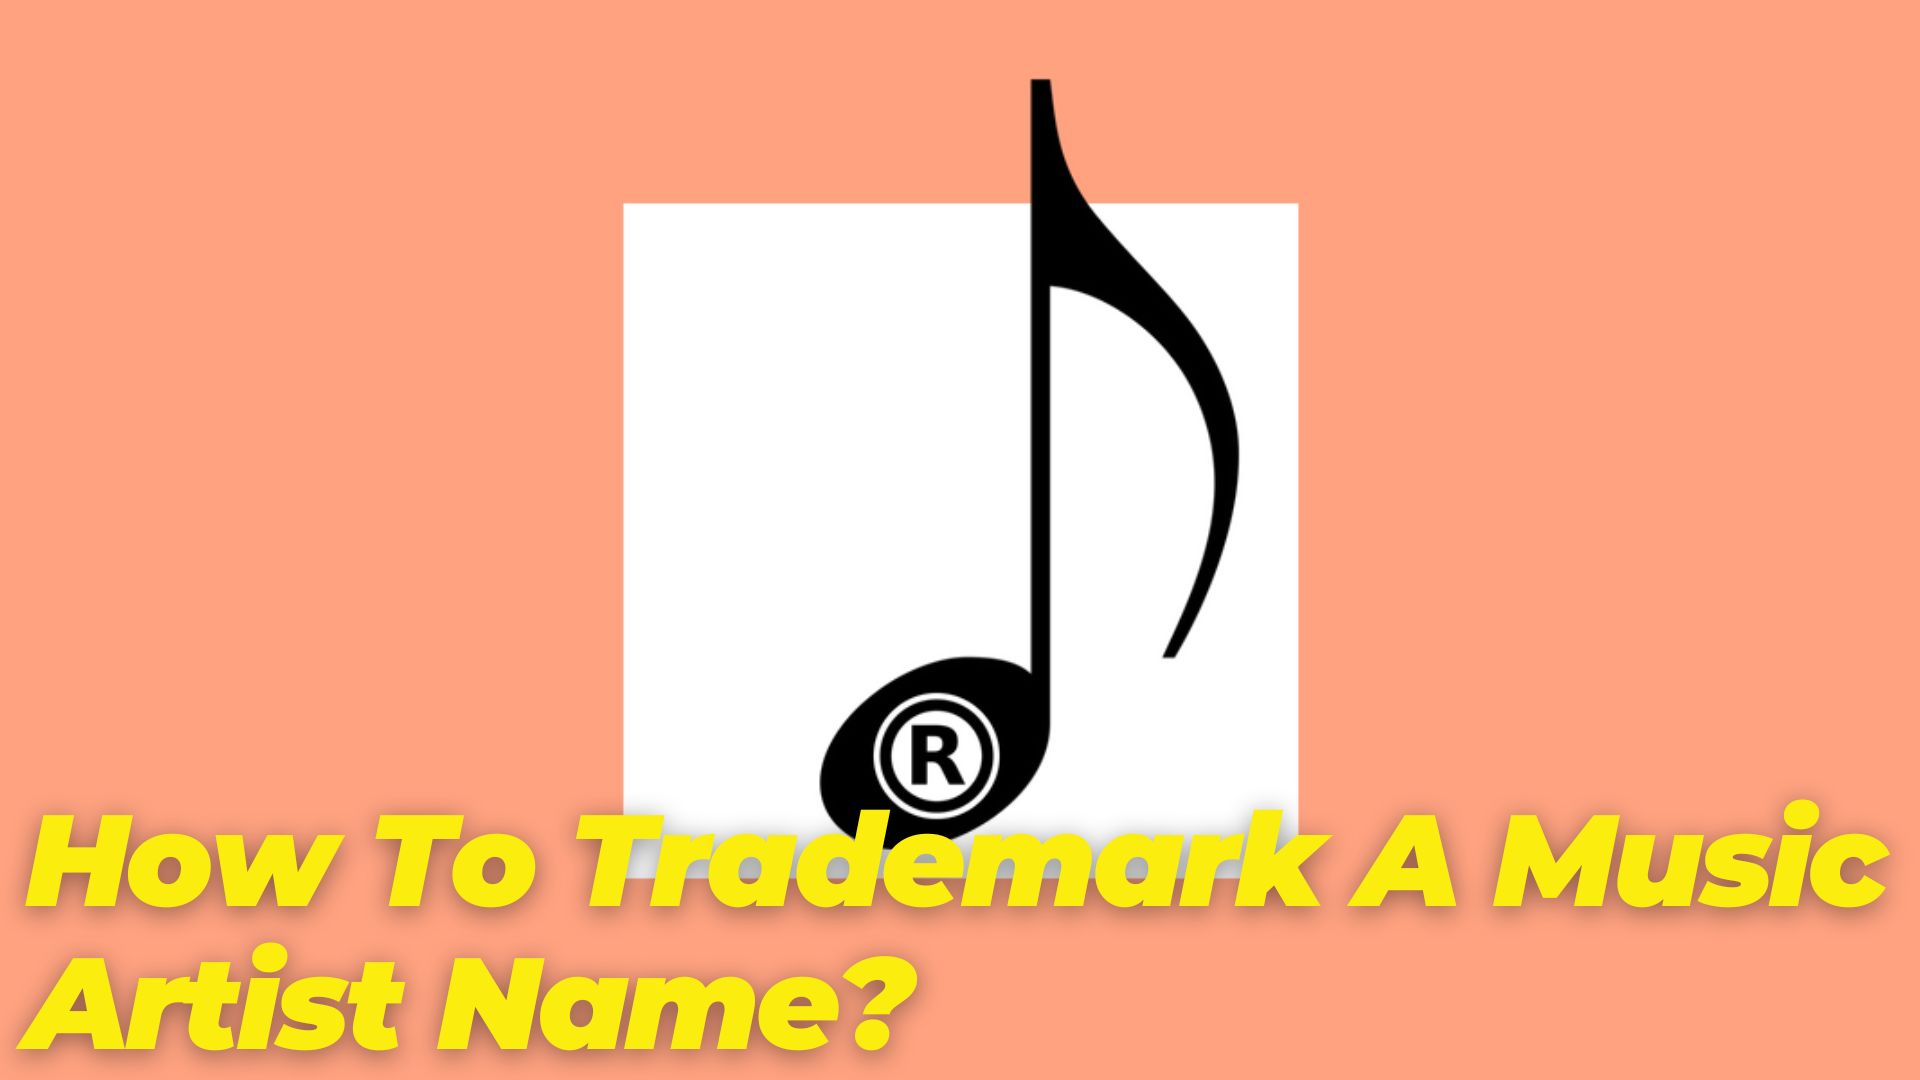 How To Trademark A Music Artist Name?